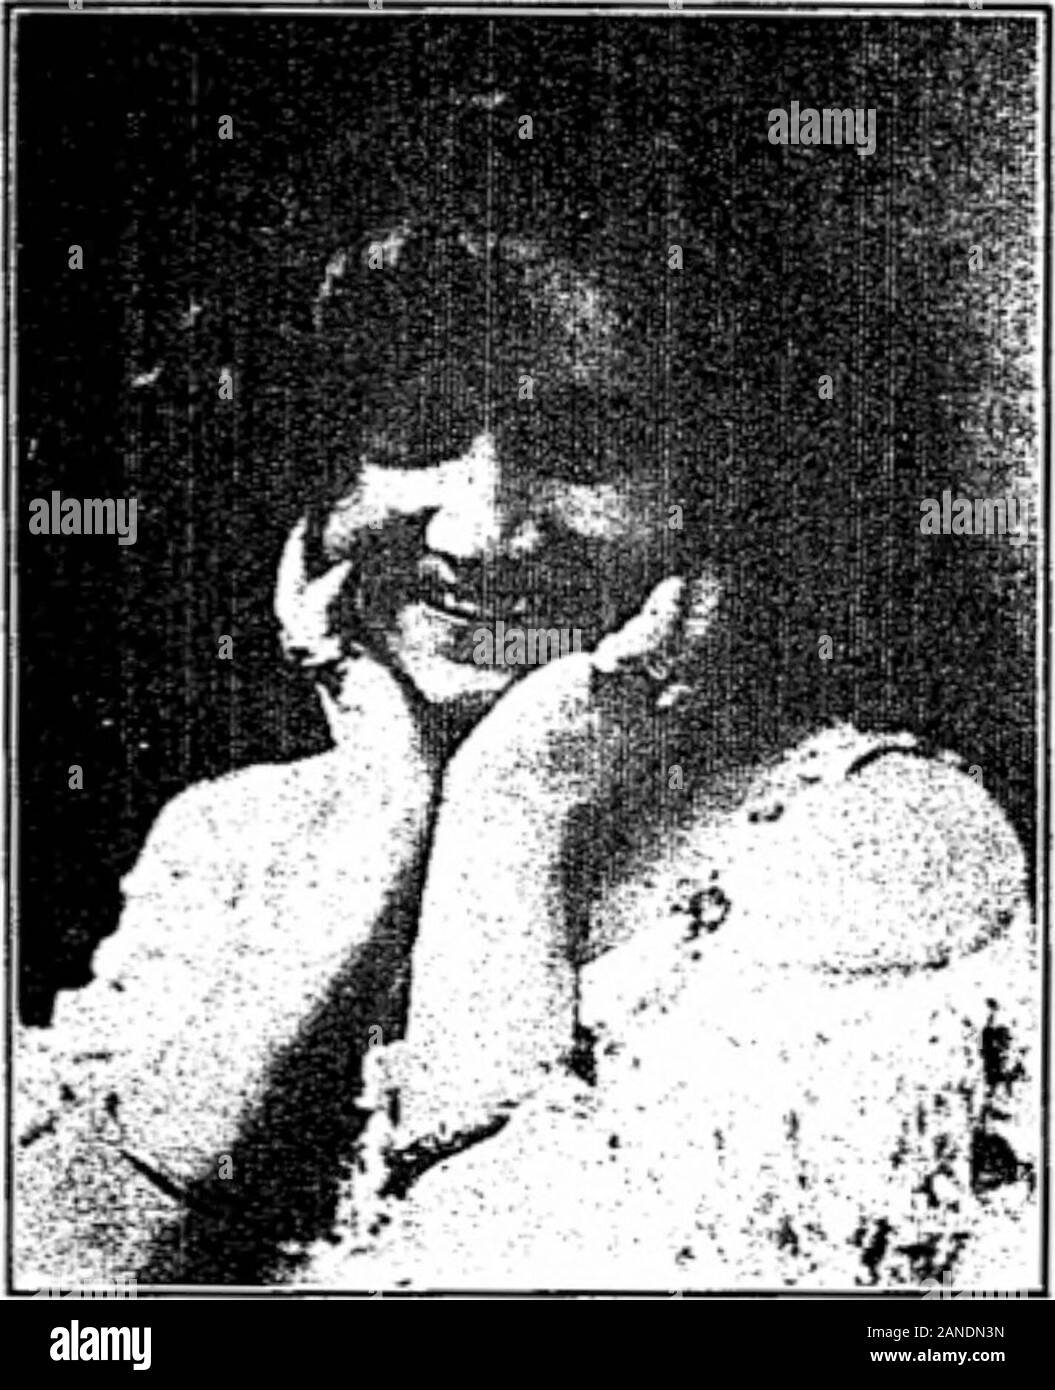 The New York Clipper (May 1917) . ———— MUSICIAN WEDS SHOW GIRL Hy. Clifton, bead of the musical depart-ment of the Klaw & Erlanger offices, andHazel Lewis, a member of The CenturyGirl company, were married last week inthe Sacred Heart Church. MARGOT GEORGES FOR BALLET Margot Georges, who was one of theprincipal skaters at the Hippodrome, hasbeen engaged for the Summer Ice Skat-ing Ballet at Thomas Healys Golden Glades. CHANGE NAME OF FROLICThe title of the Ziegfeld MidnightFrolic, given on the New Amsterdam The-atre roof, has been changed to the Zieg-feld Eleven-Thirty p. M- Frolic. MARGARET D Stock Photo